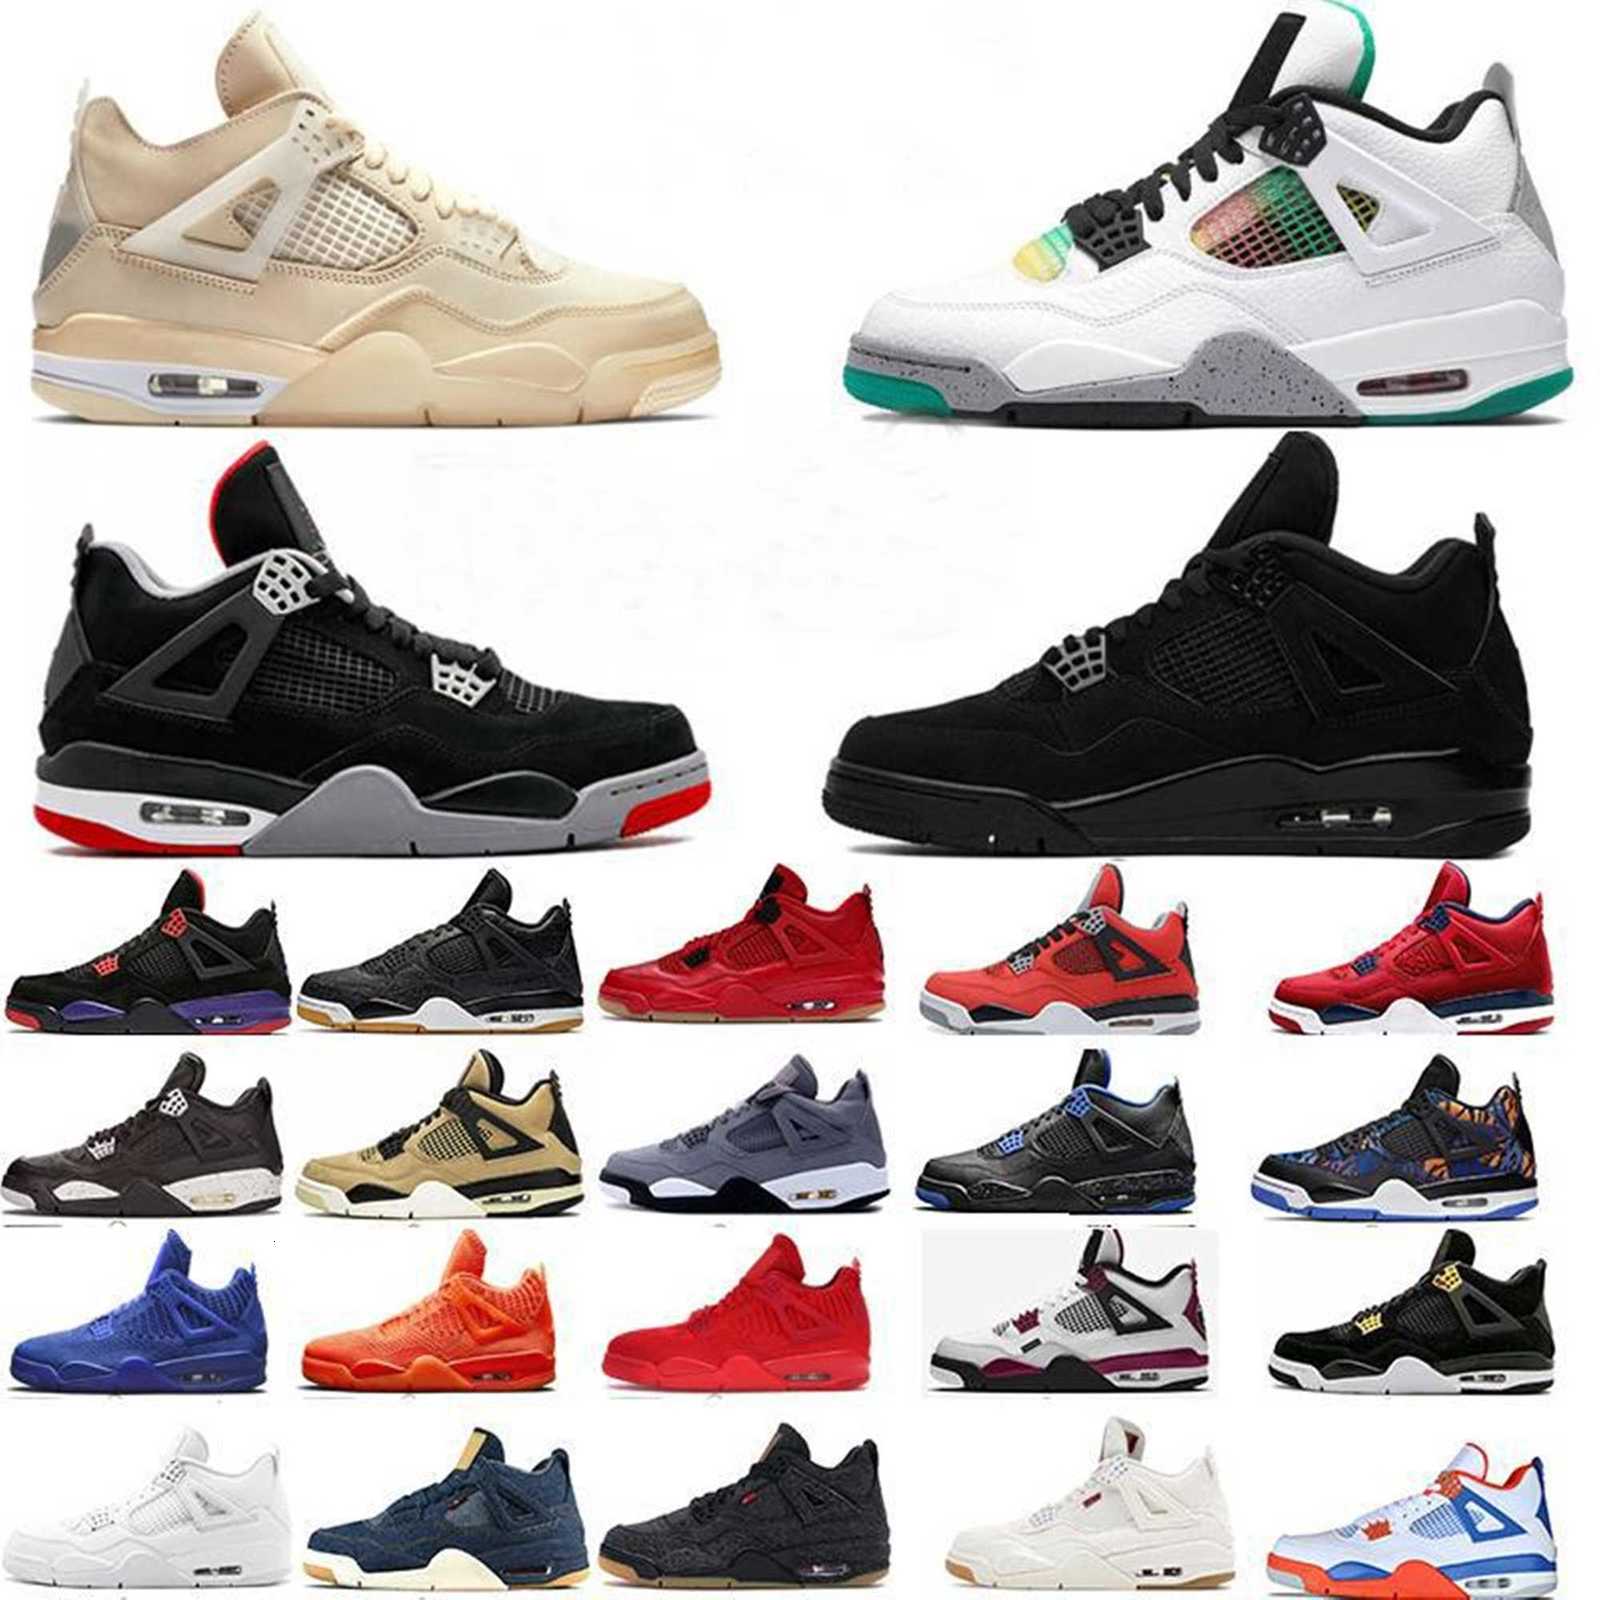 

With Box Jumpman 4 Men Basketball Shoes Women Sail Fire Red 4s Travis Bred Starfish Undefeated Black Cat s Court Purple Trainers Sneakers